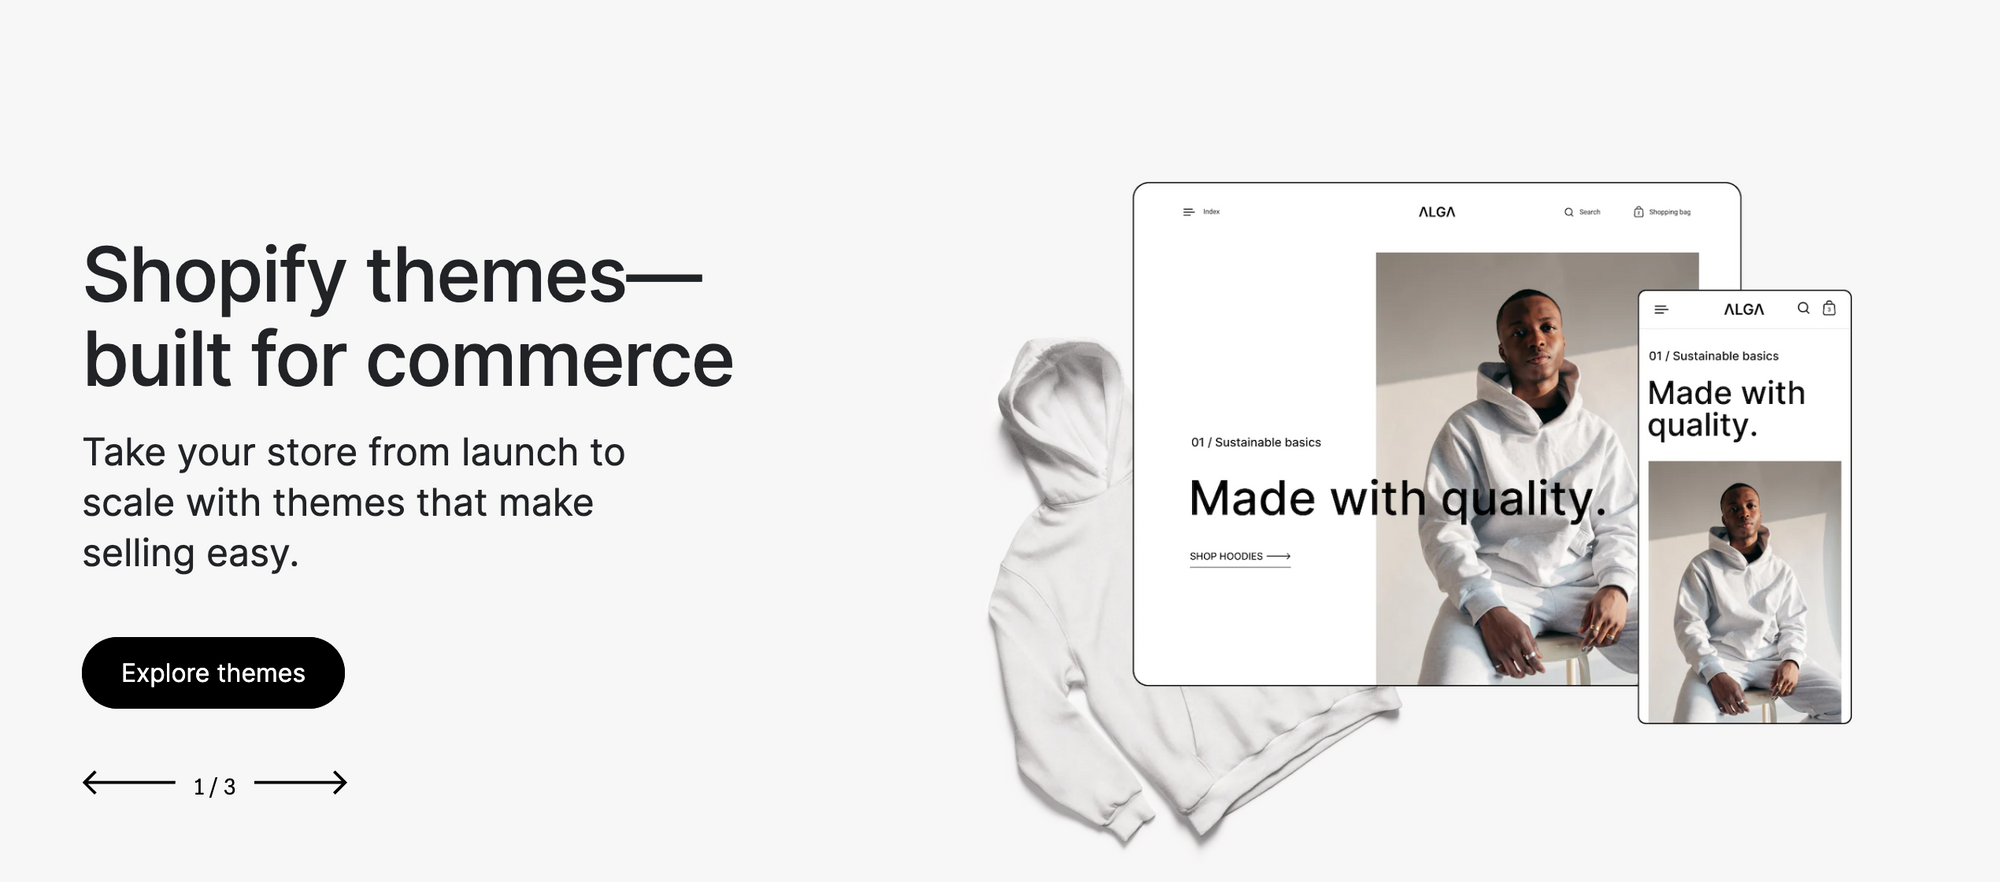 Shopify fashion themes from the theme store